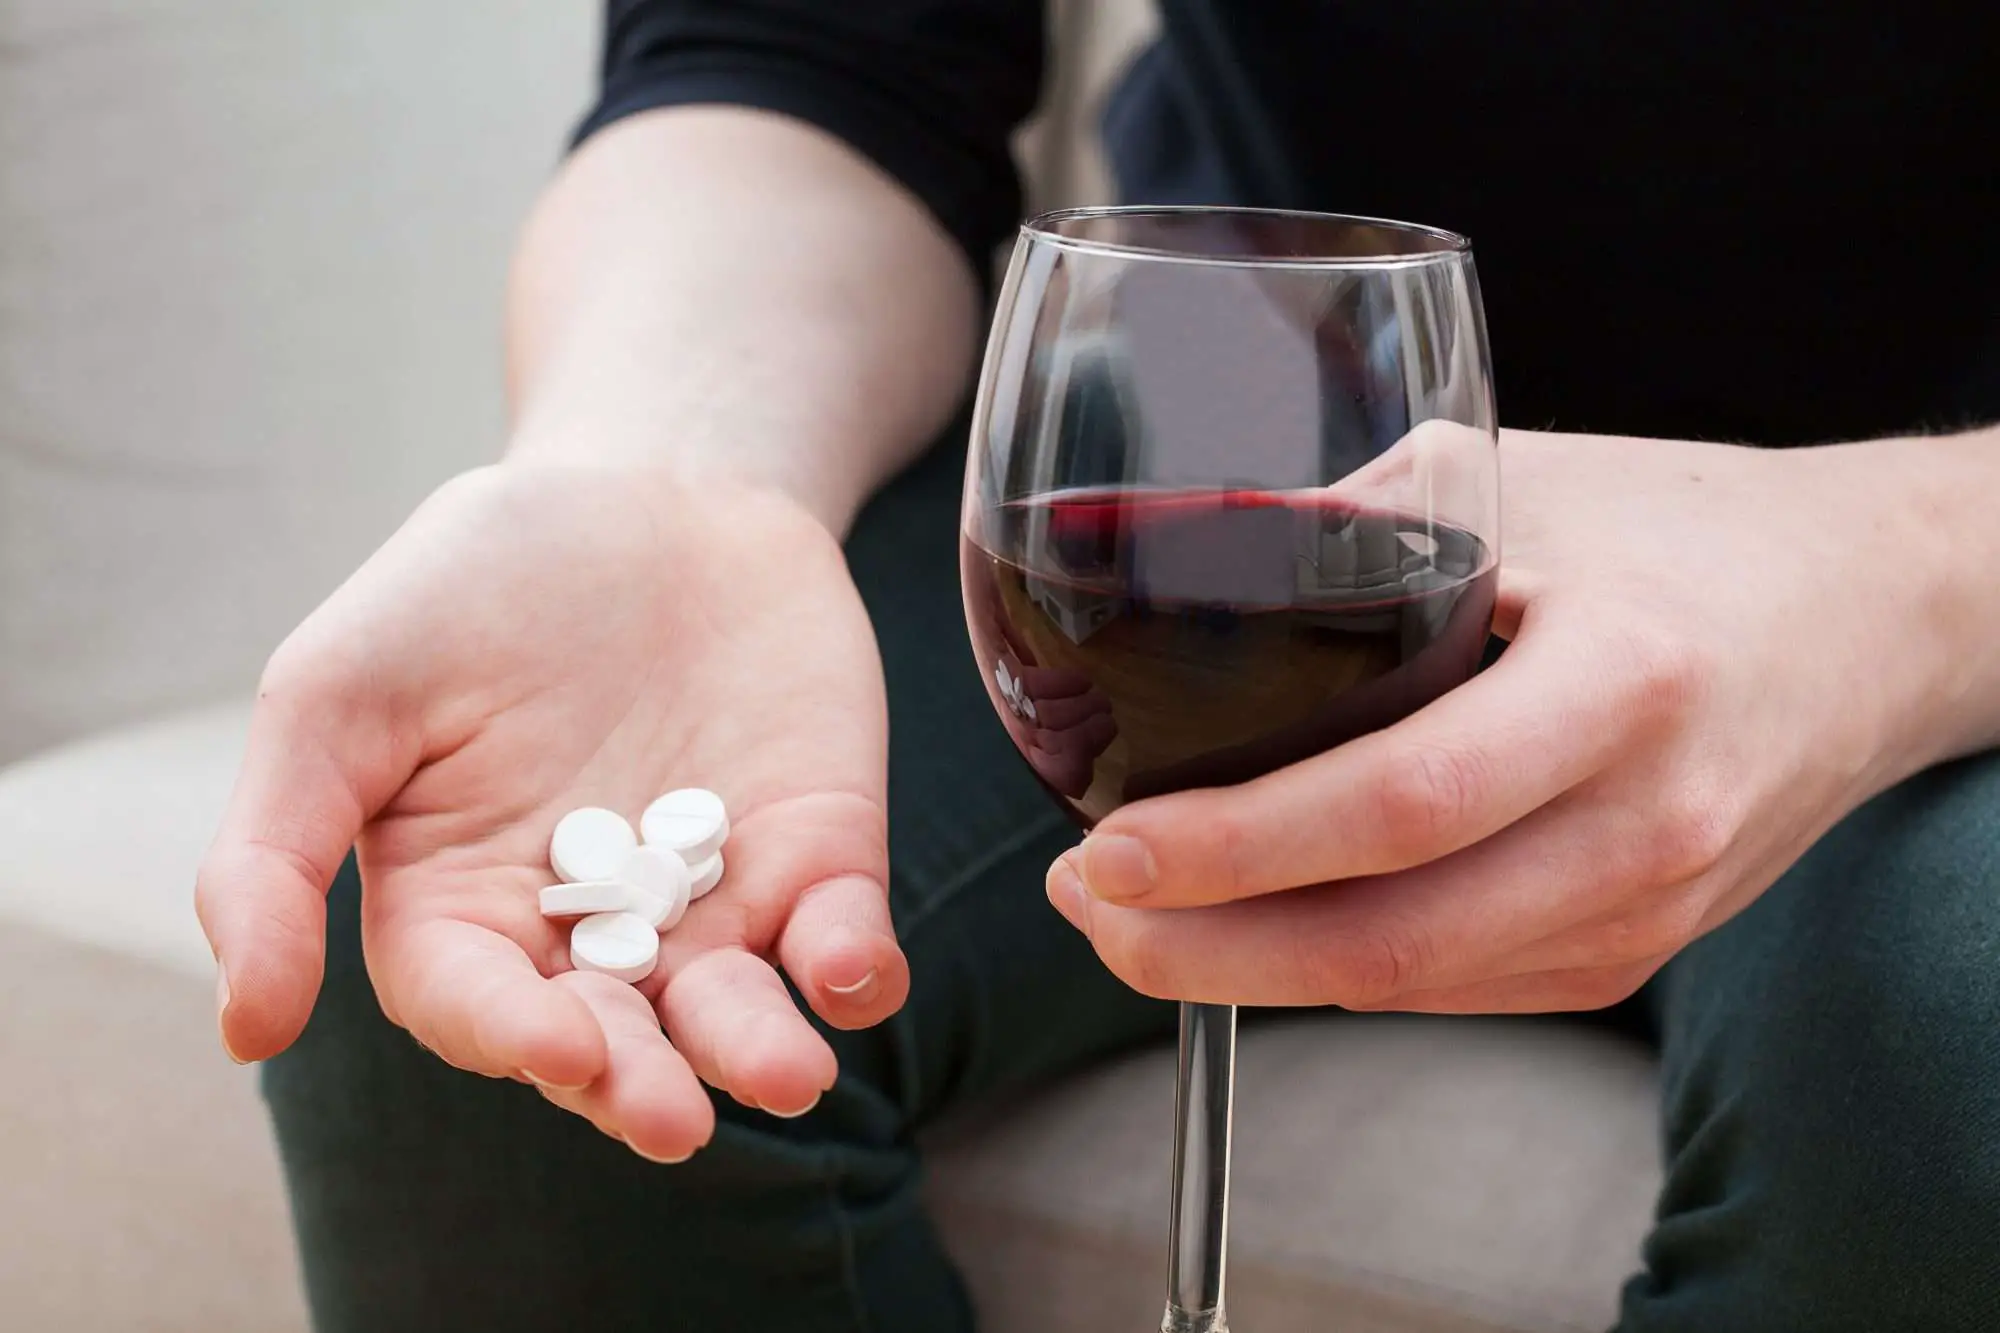 How Bad Is It to Have Alcohol While on Antibiotics?